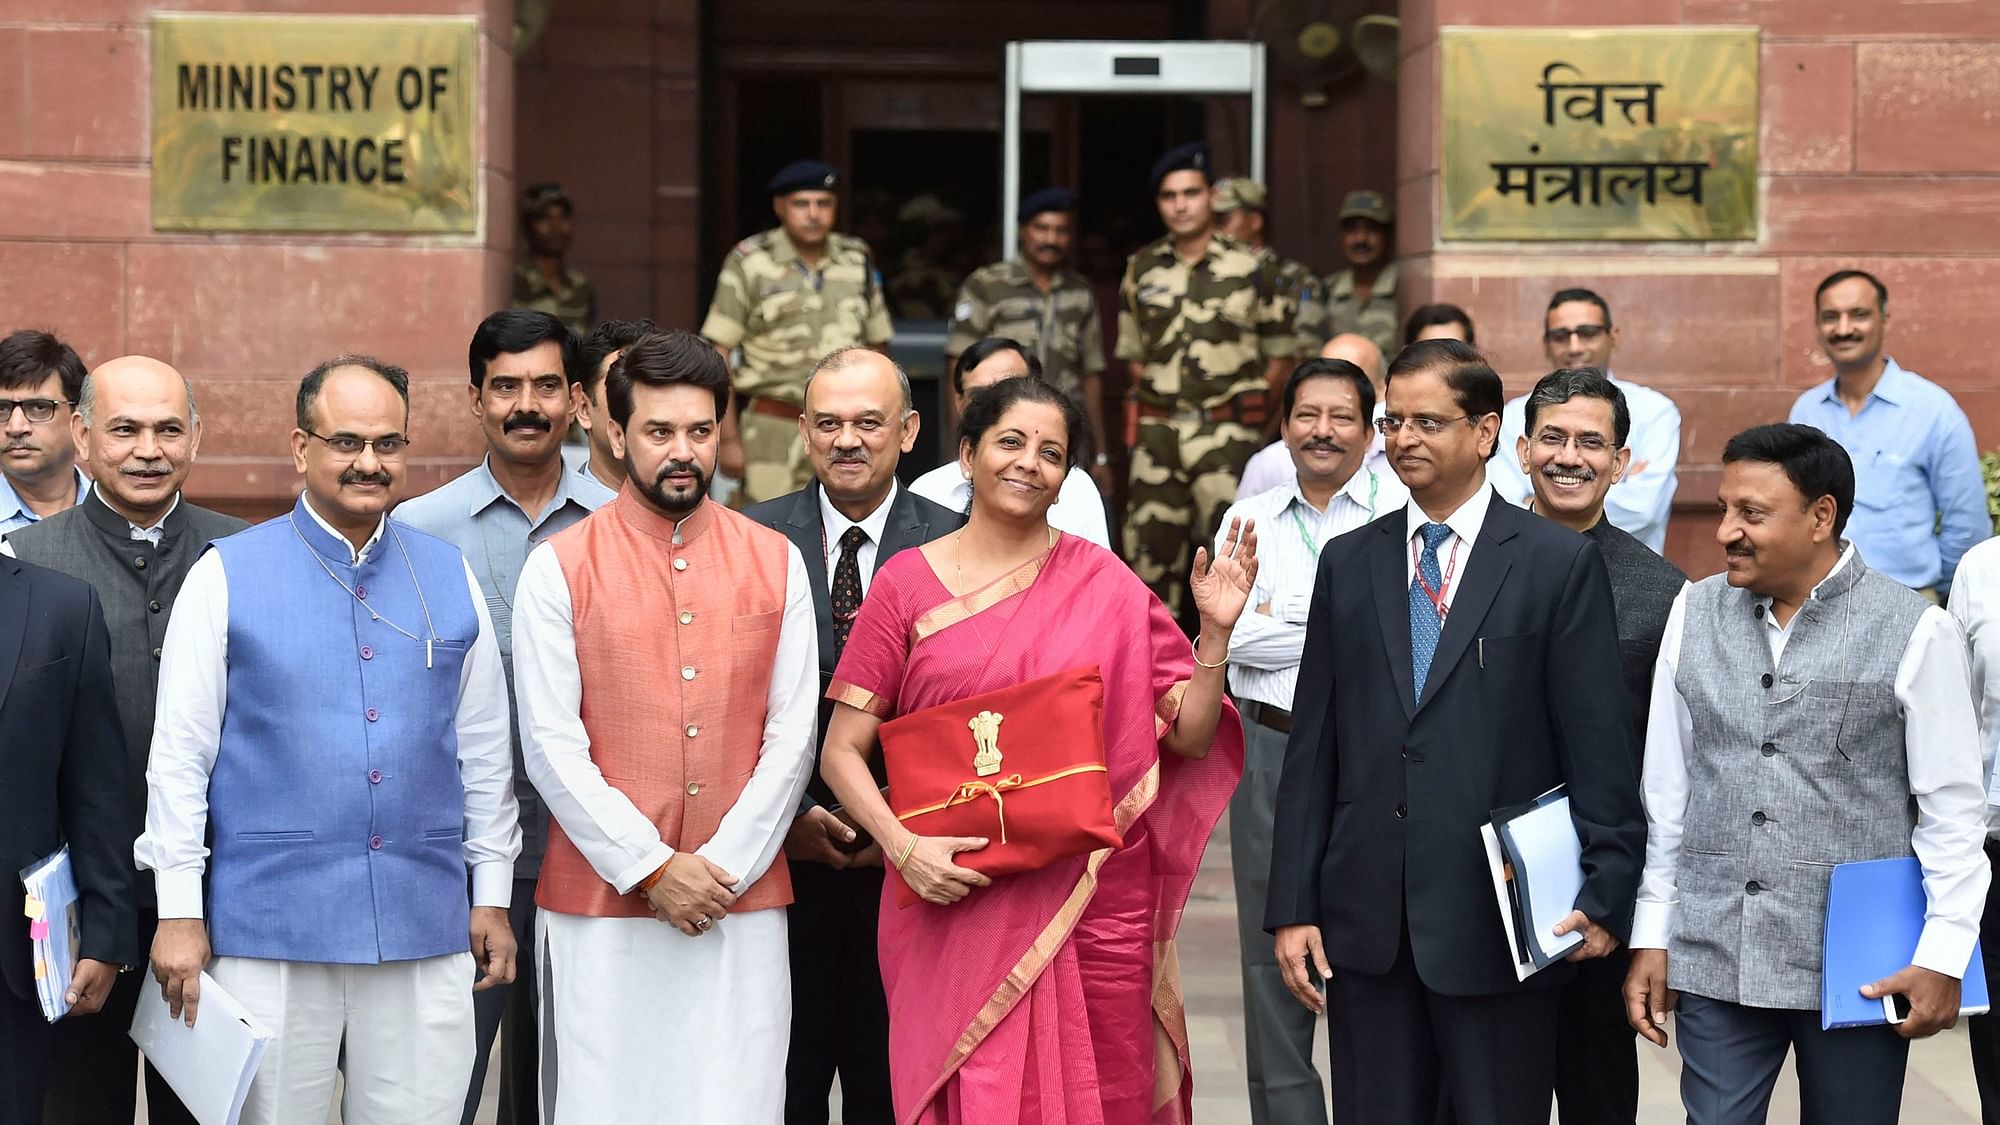 Finance Minister Nirmala Sitharaman before the presenting the budget.